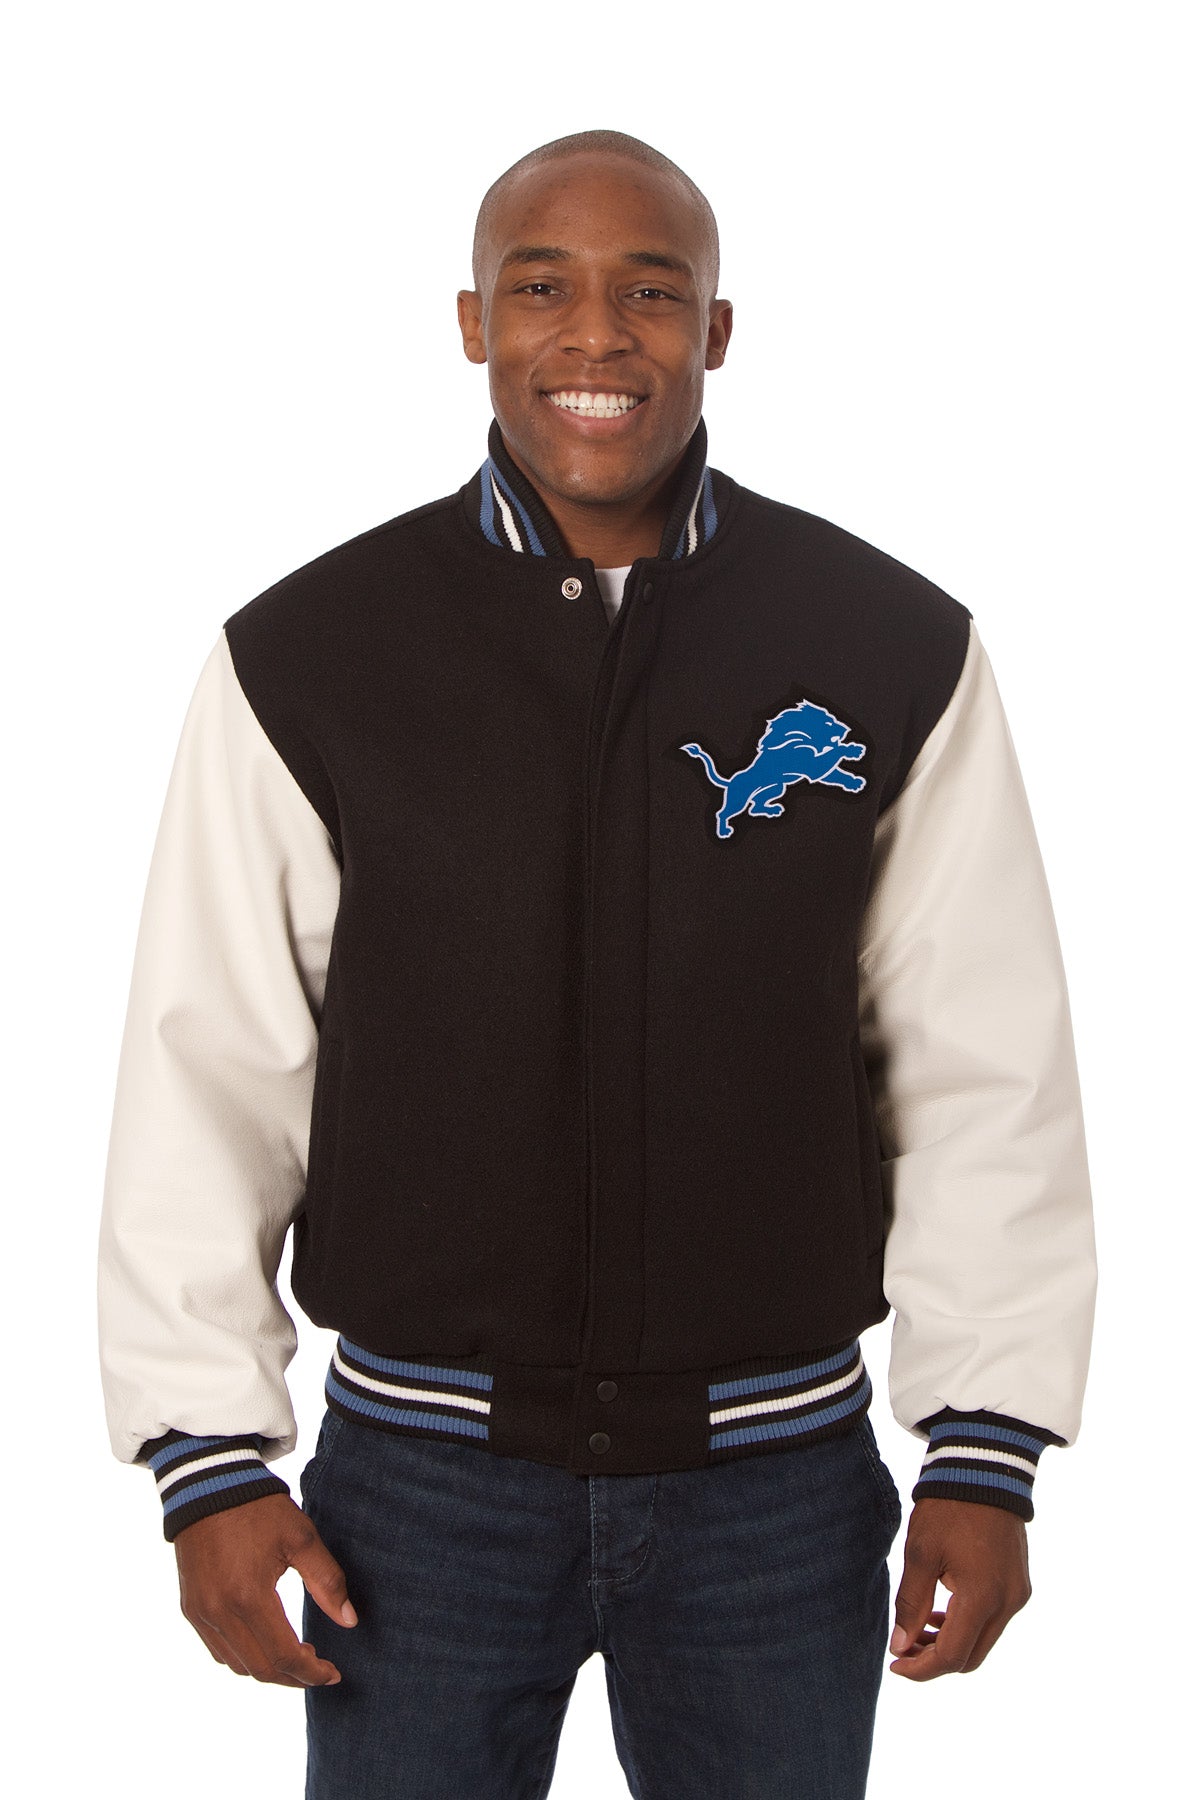 Detroit Lions Two-Tone Wool and Leather Jacket - Black/White 5X-Large